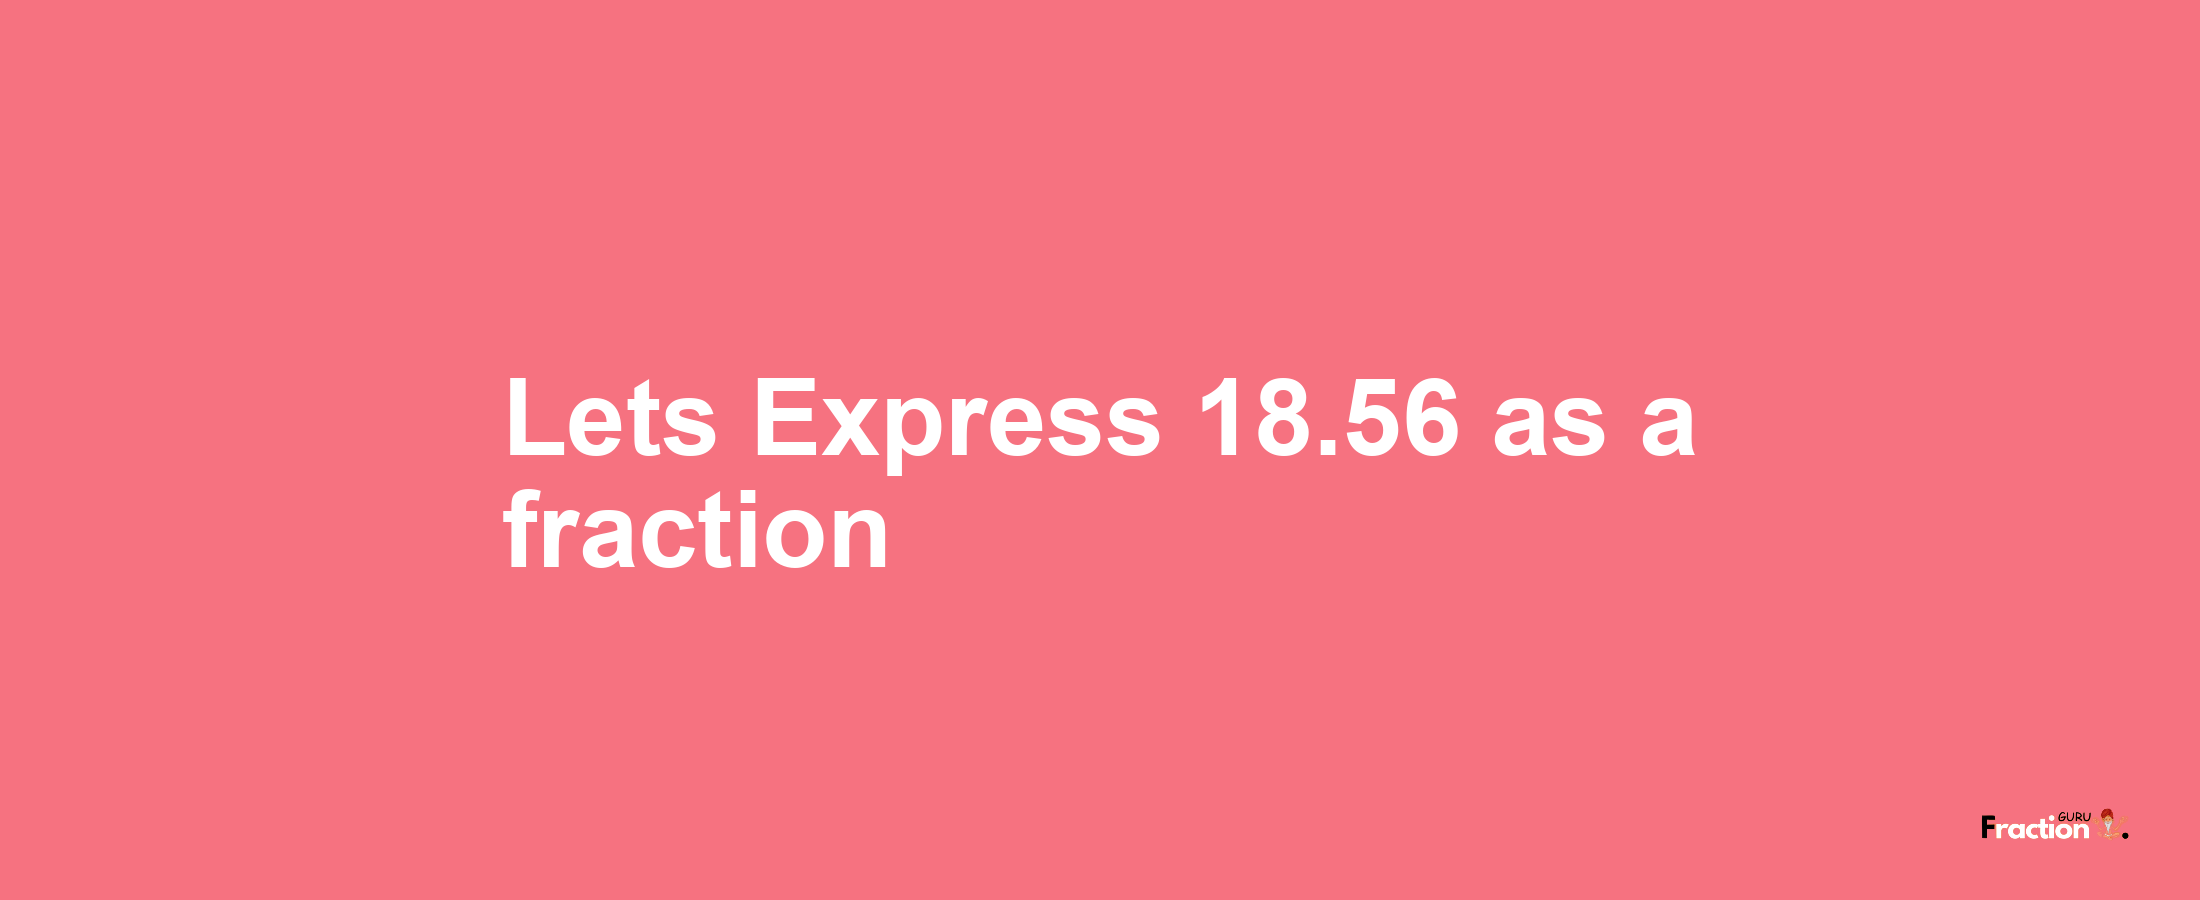 Lets Express 18.56 as afraction